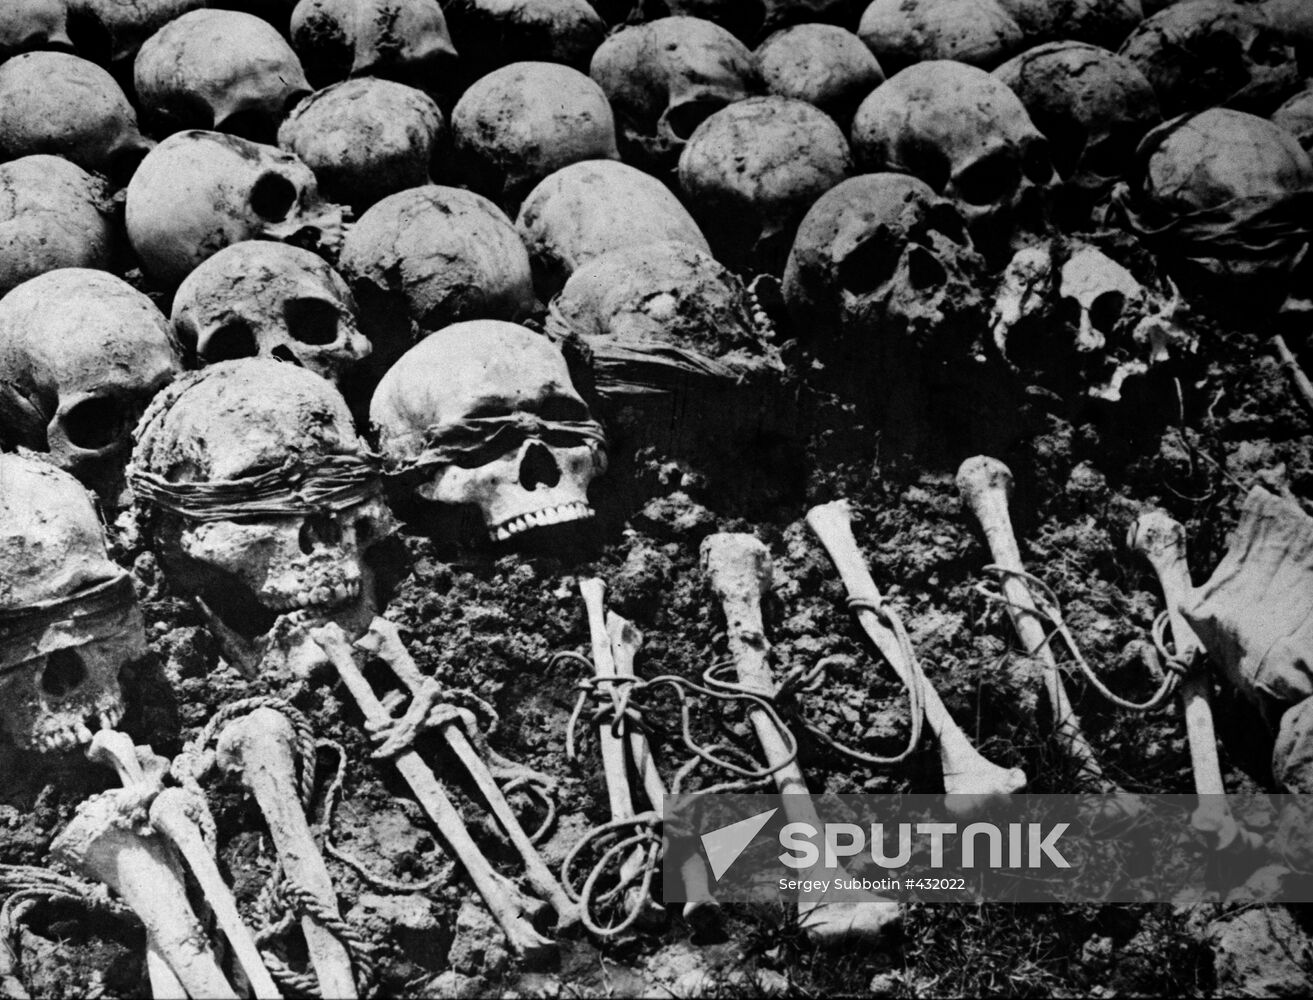 Remains of people killed by Pol Pot men